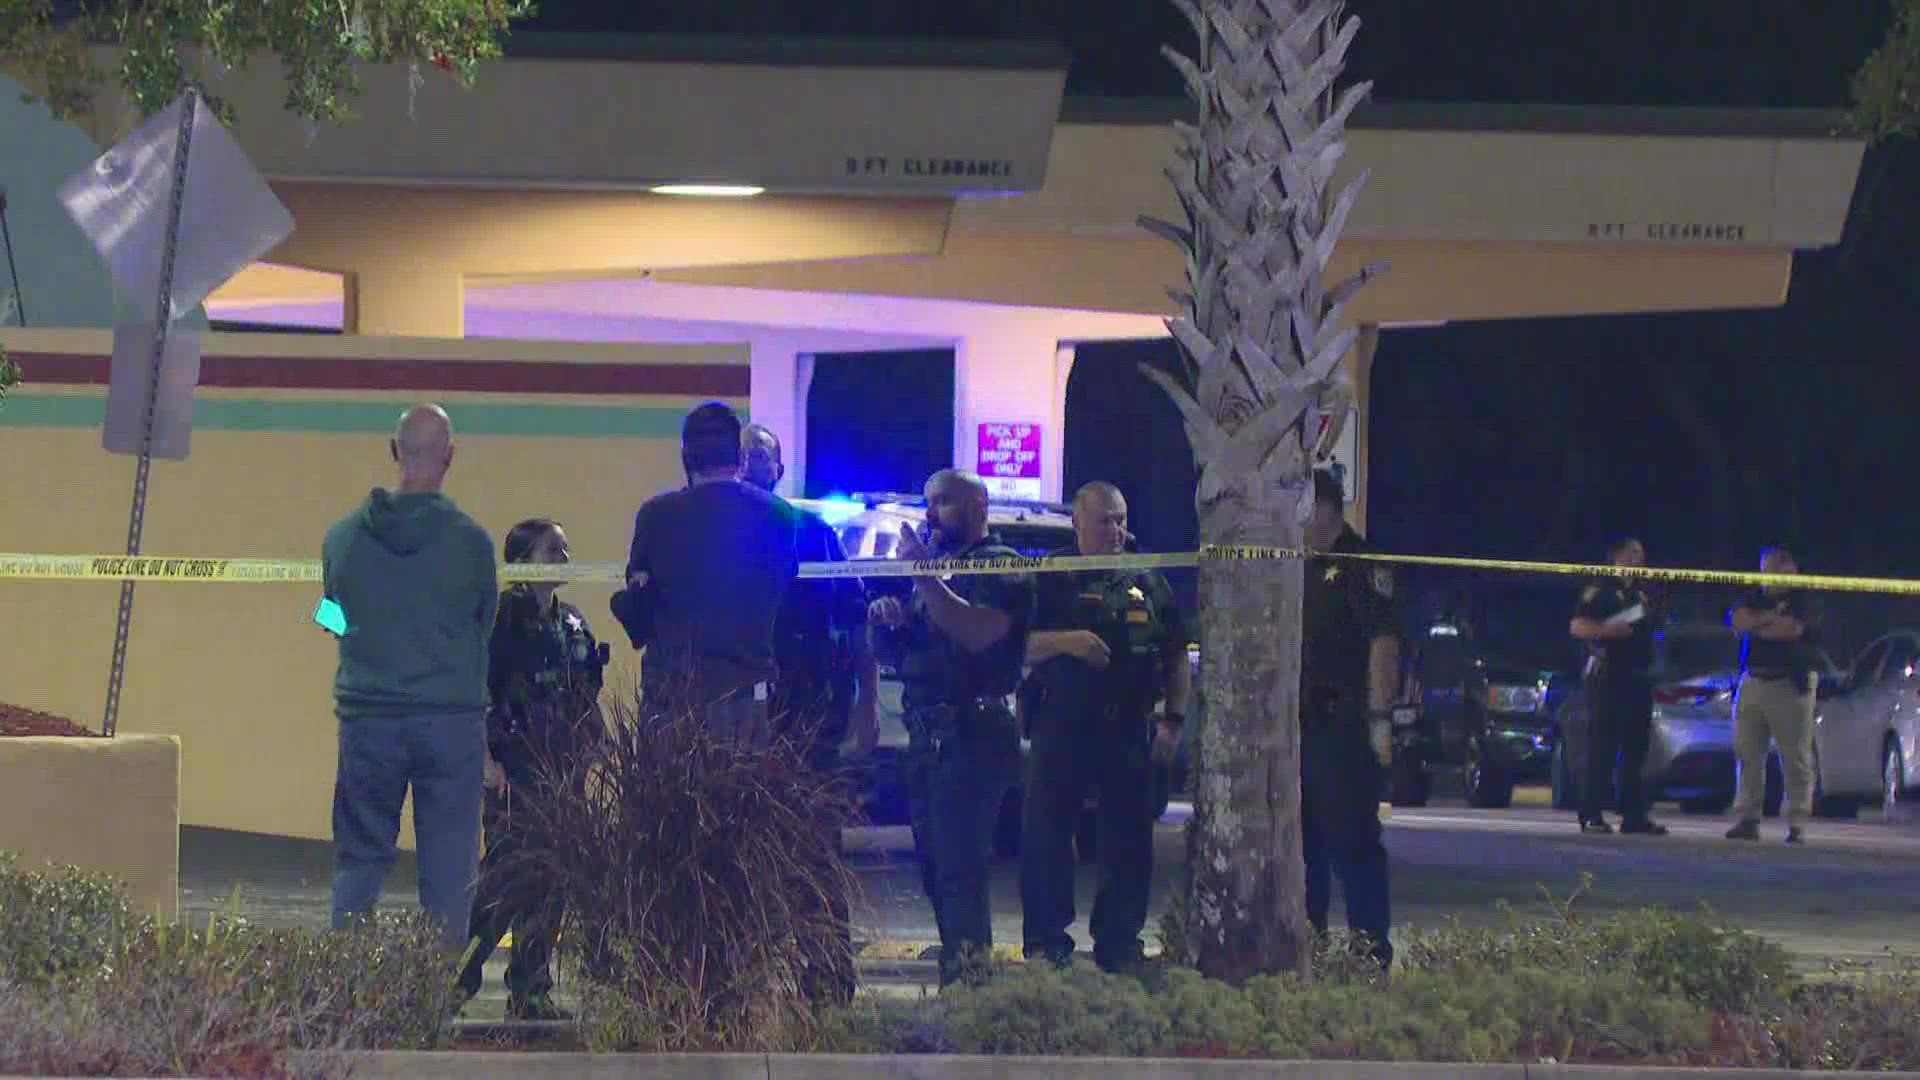 One person has been transported in critical condition from the Best Bet in Orange Park after a shooting somewhere on the property Wednesday.